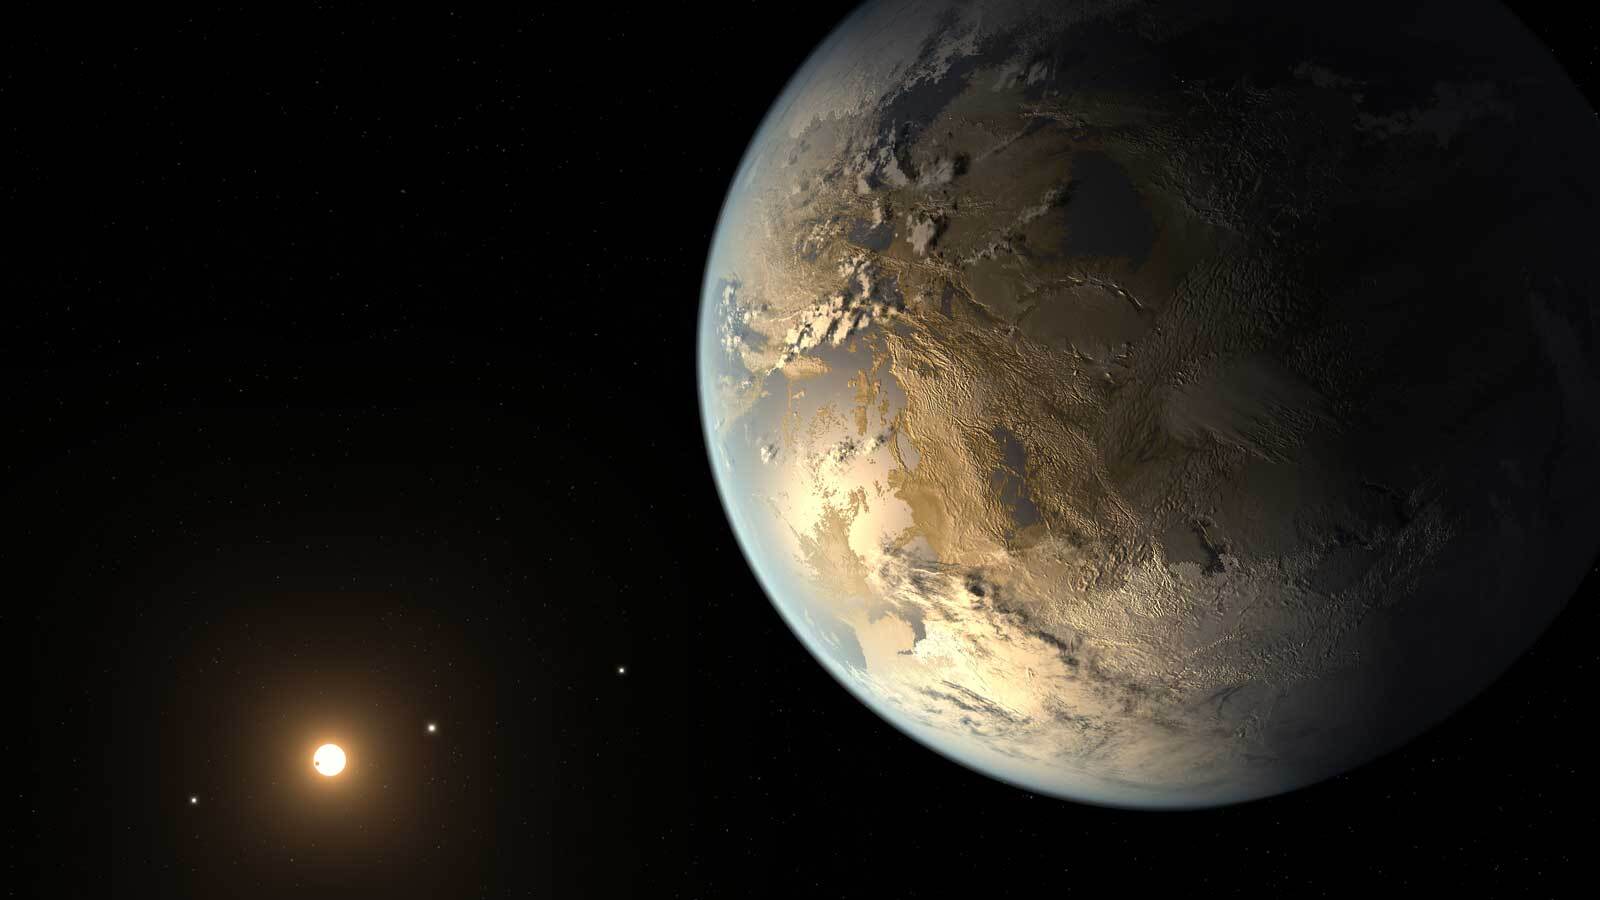 A terrestrial exoplanet is seen in an illustration